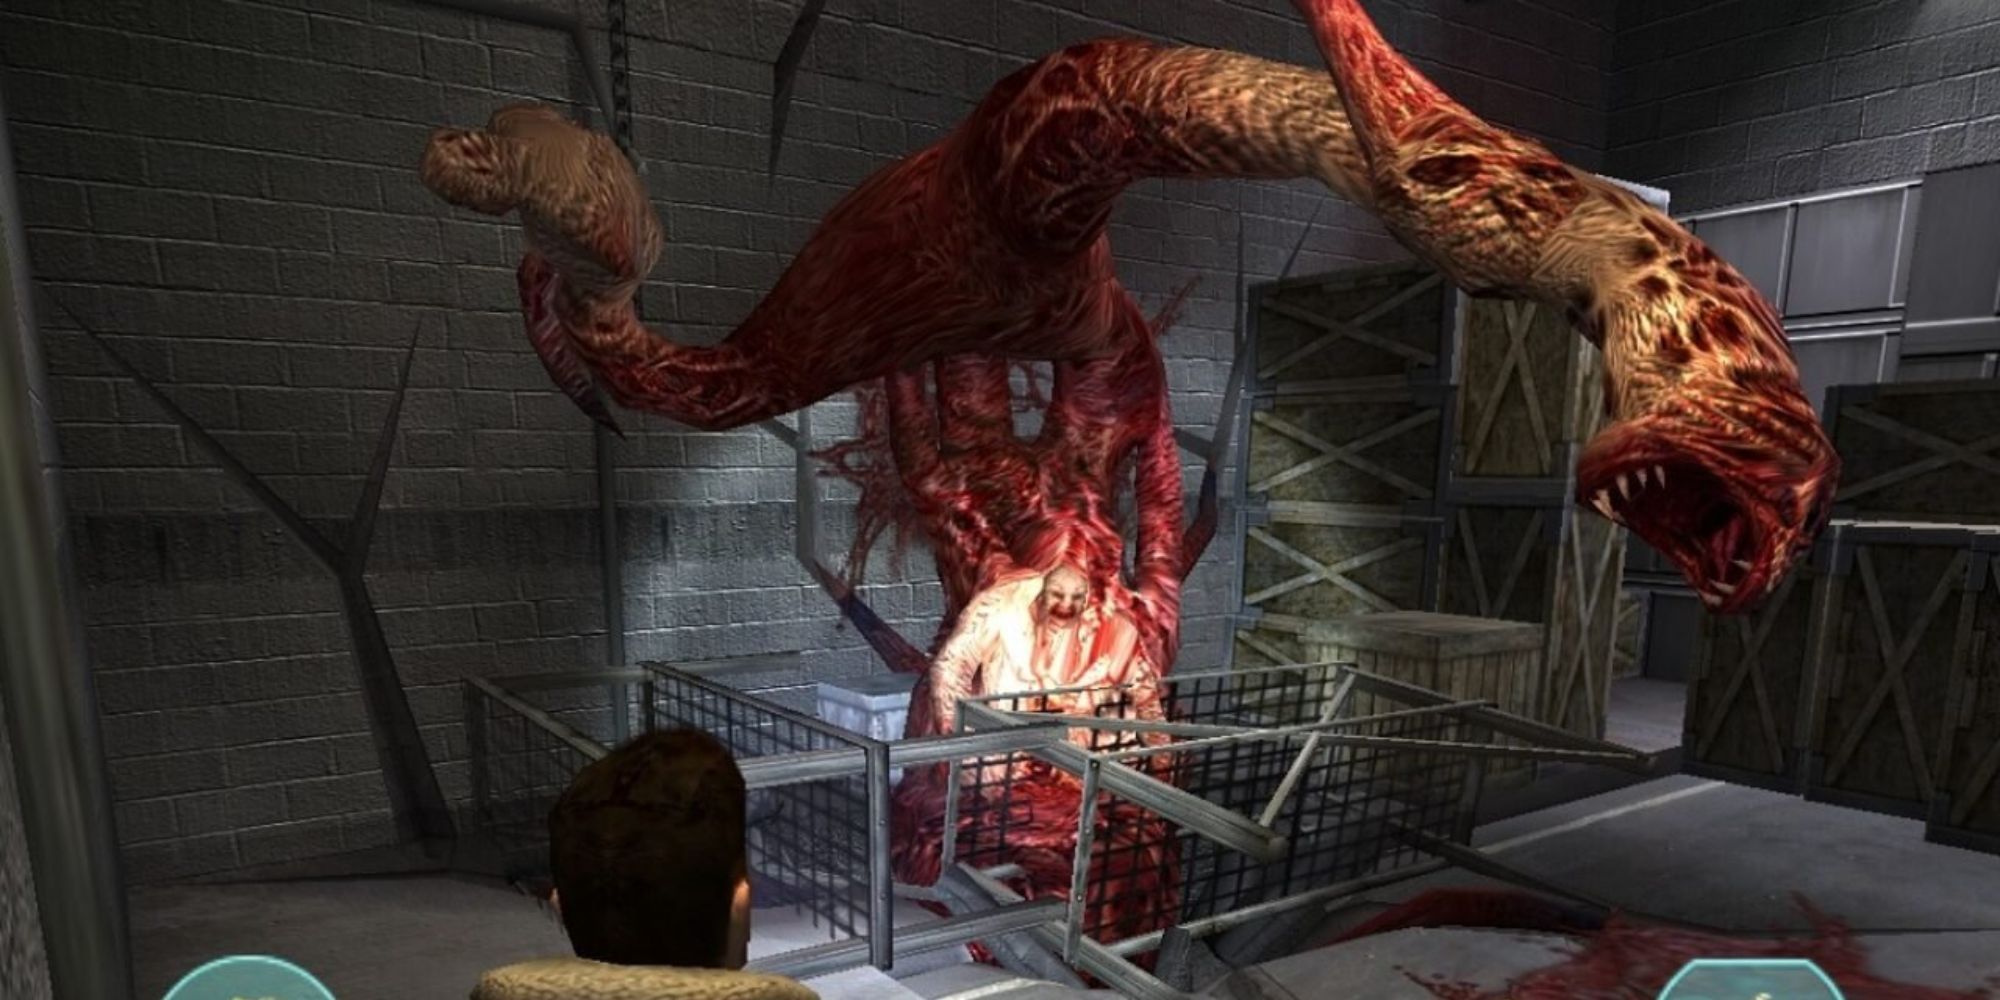 A player who is approached by a monster in The Thing Video Game